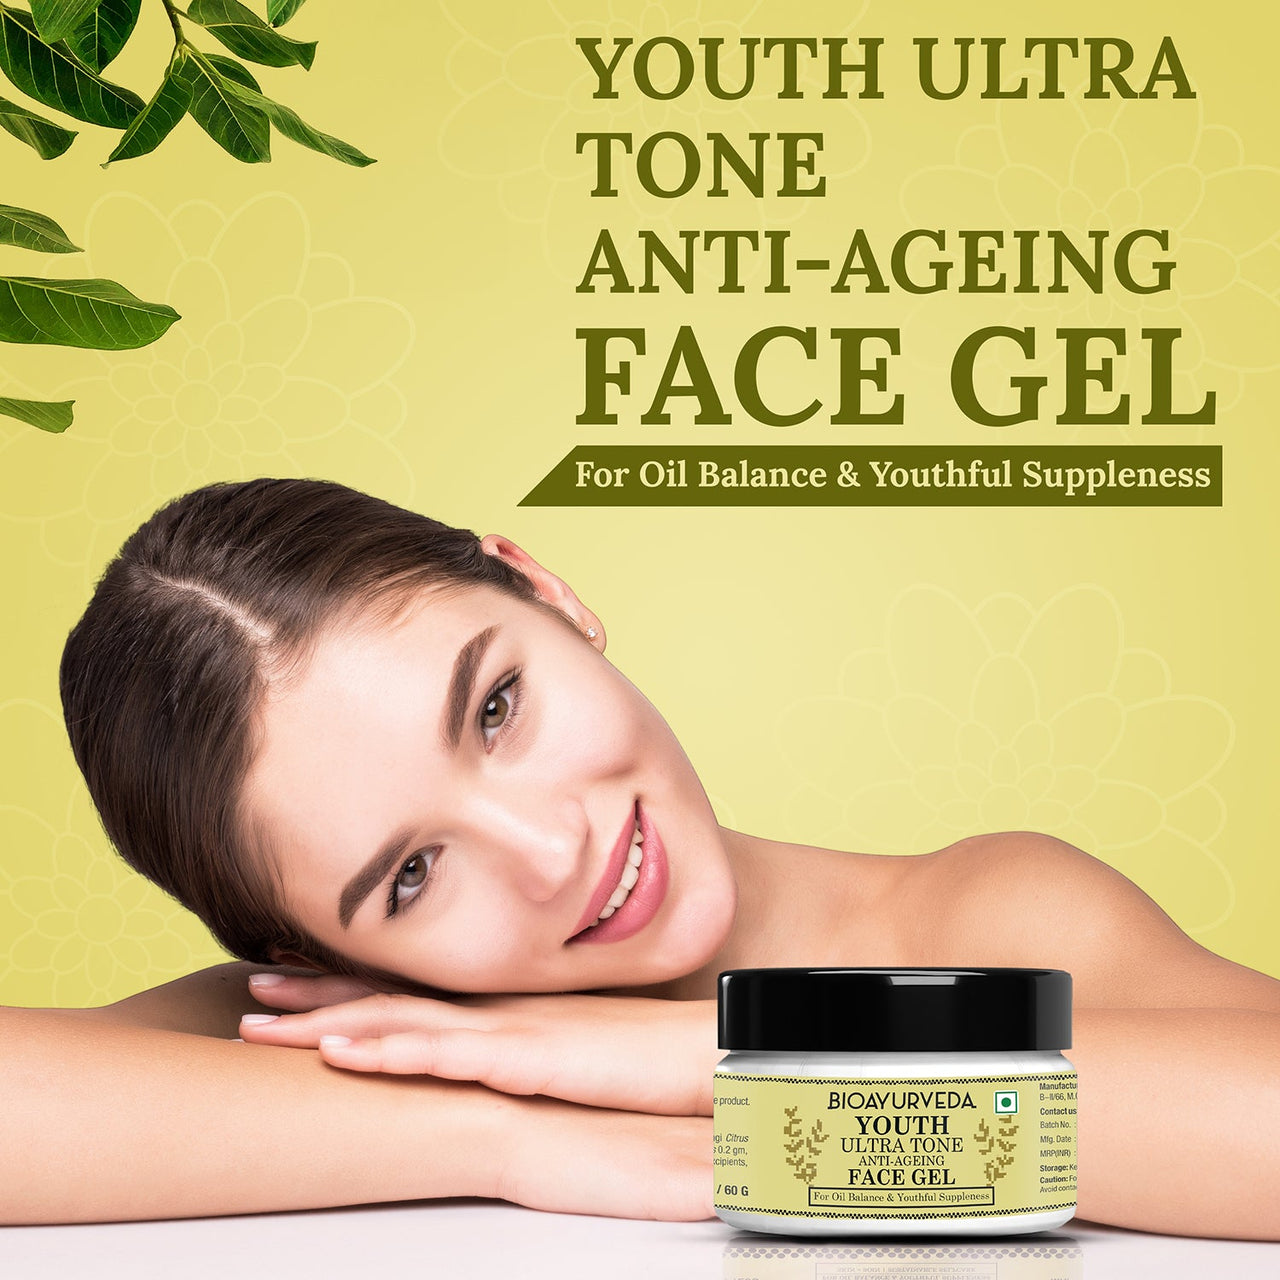 Oil Balance and Youthful Suppleness Gel